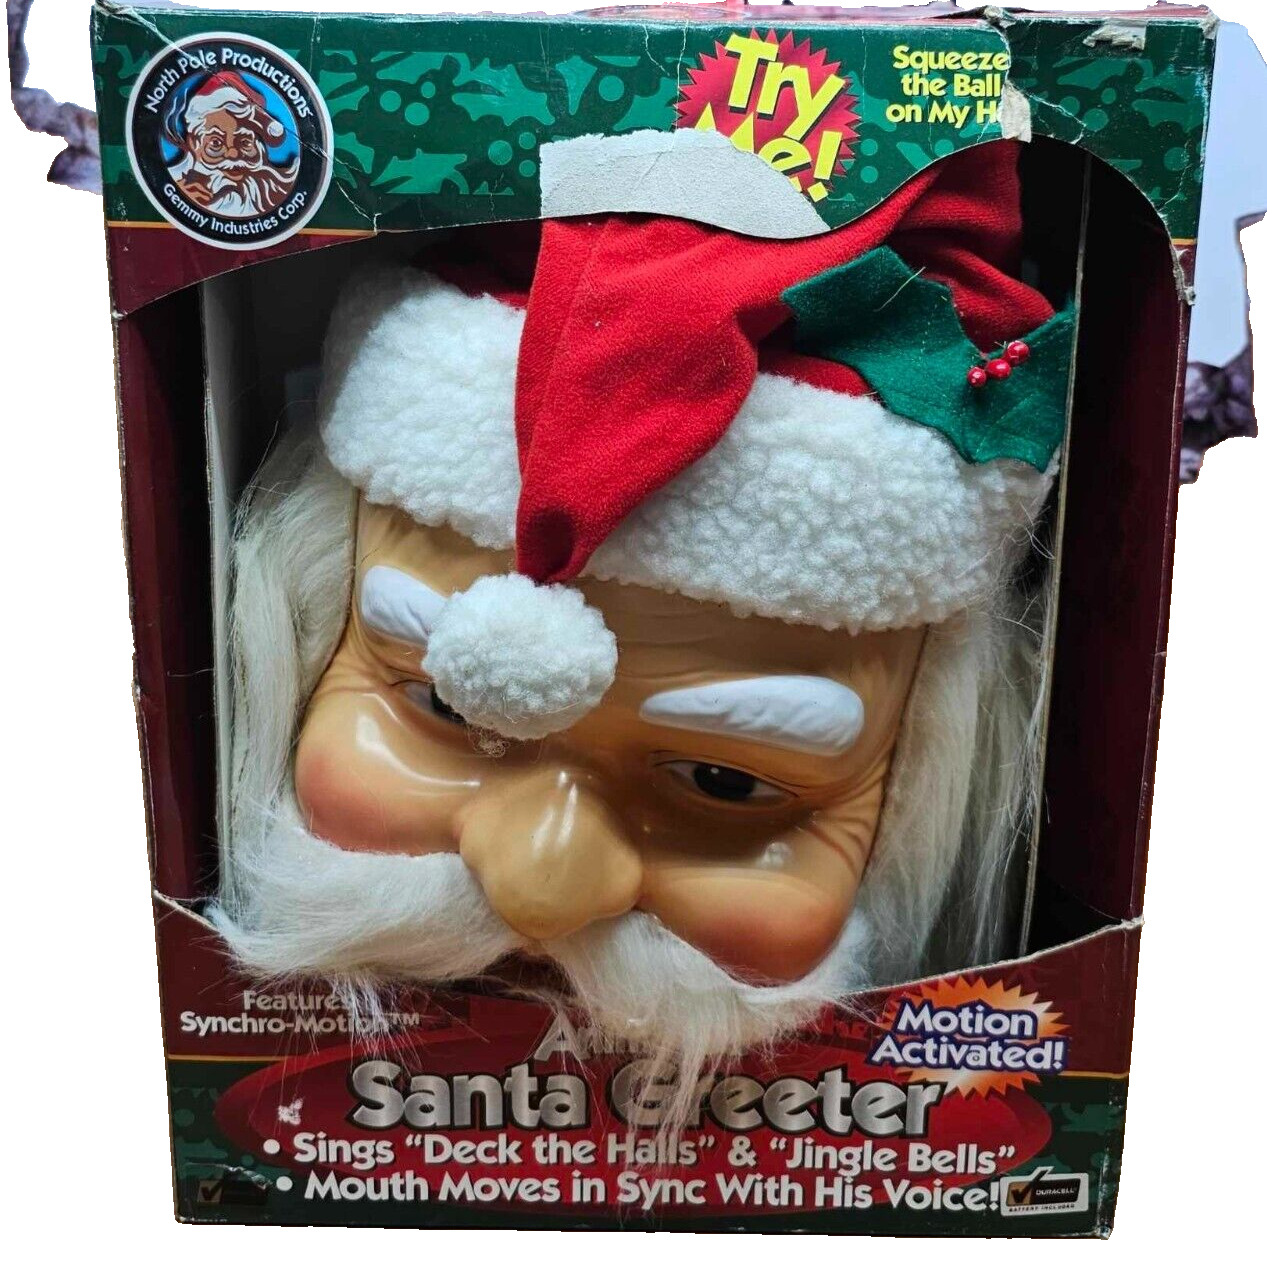 Santa Claus Greeter 1998 Gemmy North Pole sings mouth moves motion activated